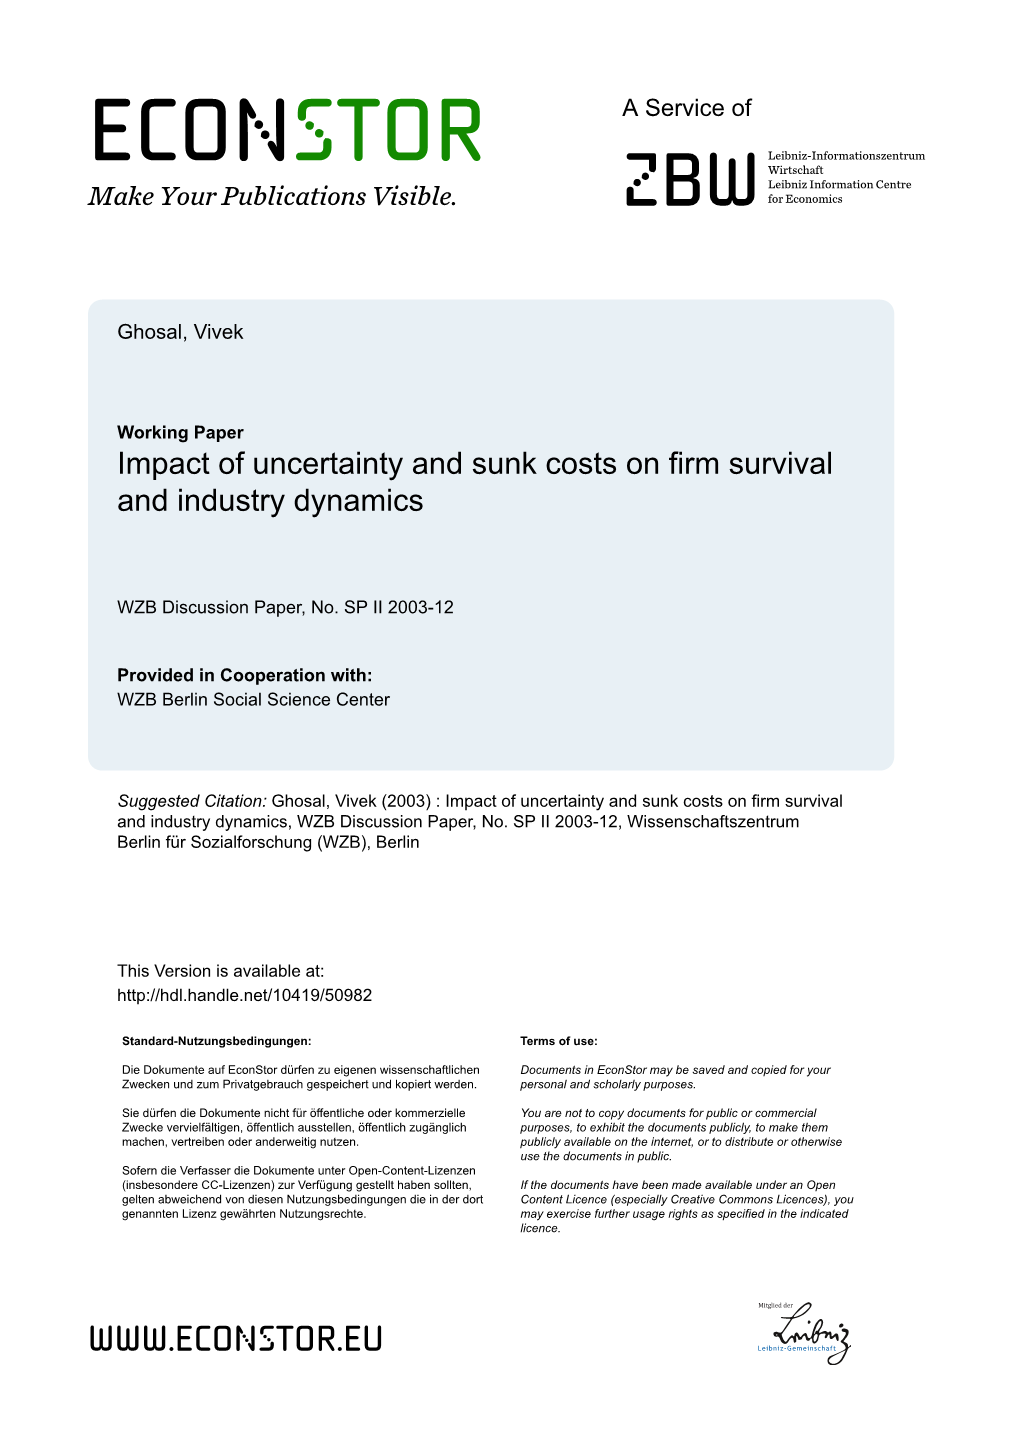 Impact of Uncertainty and Sunk Costs on Firm Survival and Industry Dynamics